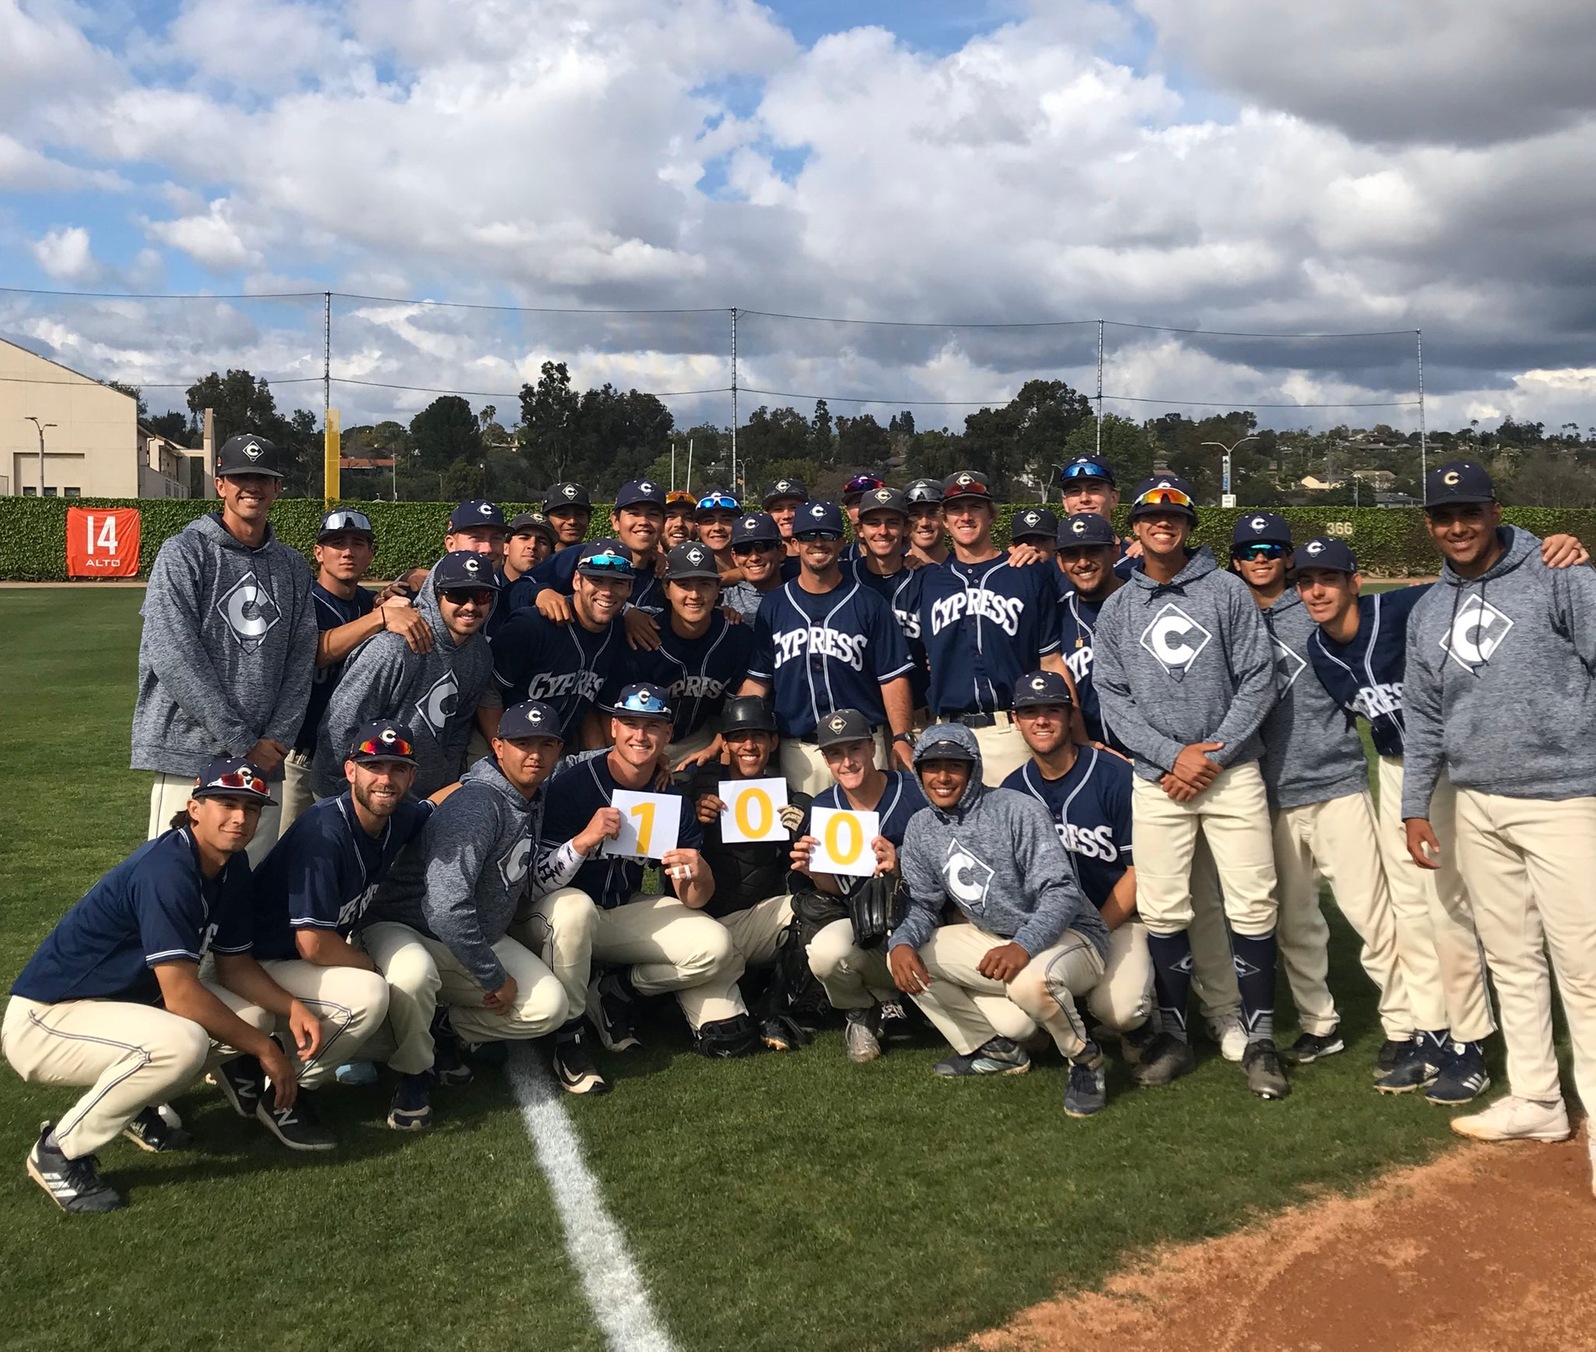 Coach Anthony Hutting Earns His 100th Win